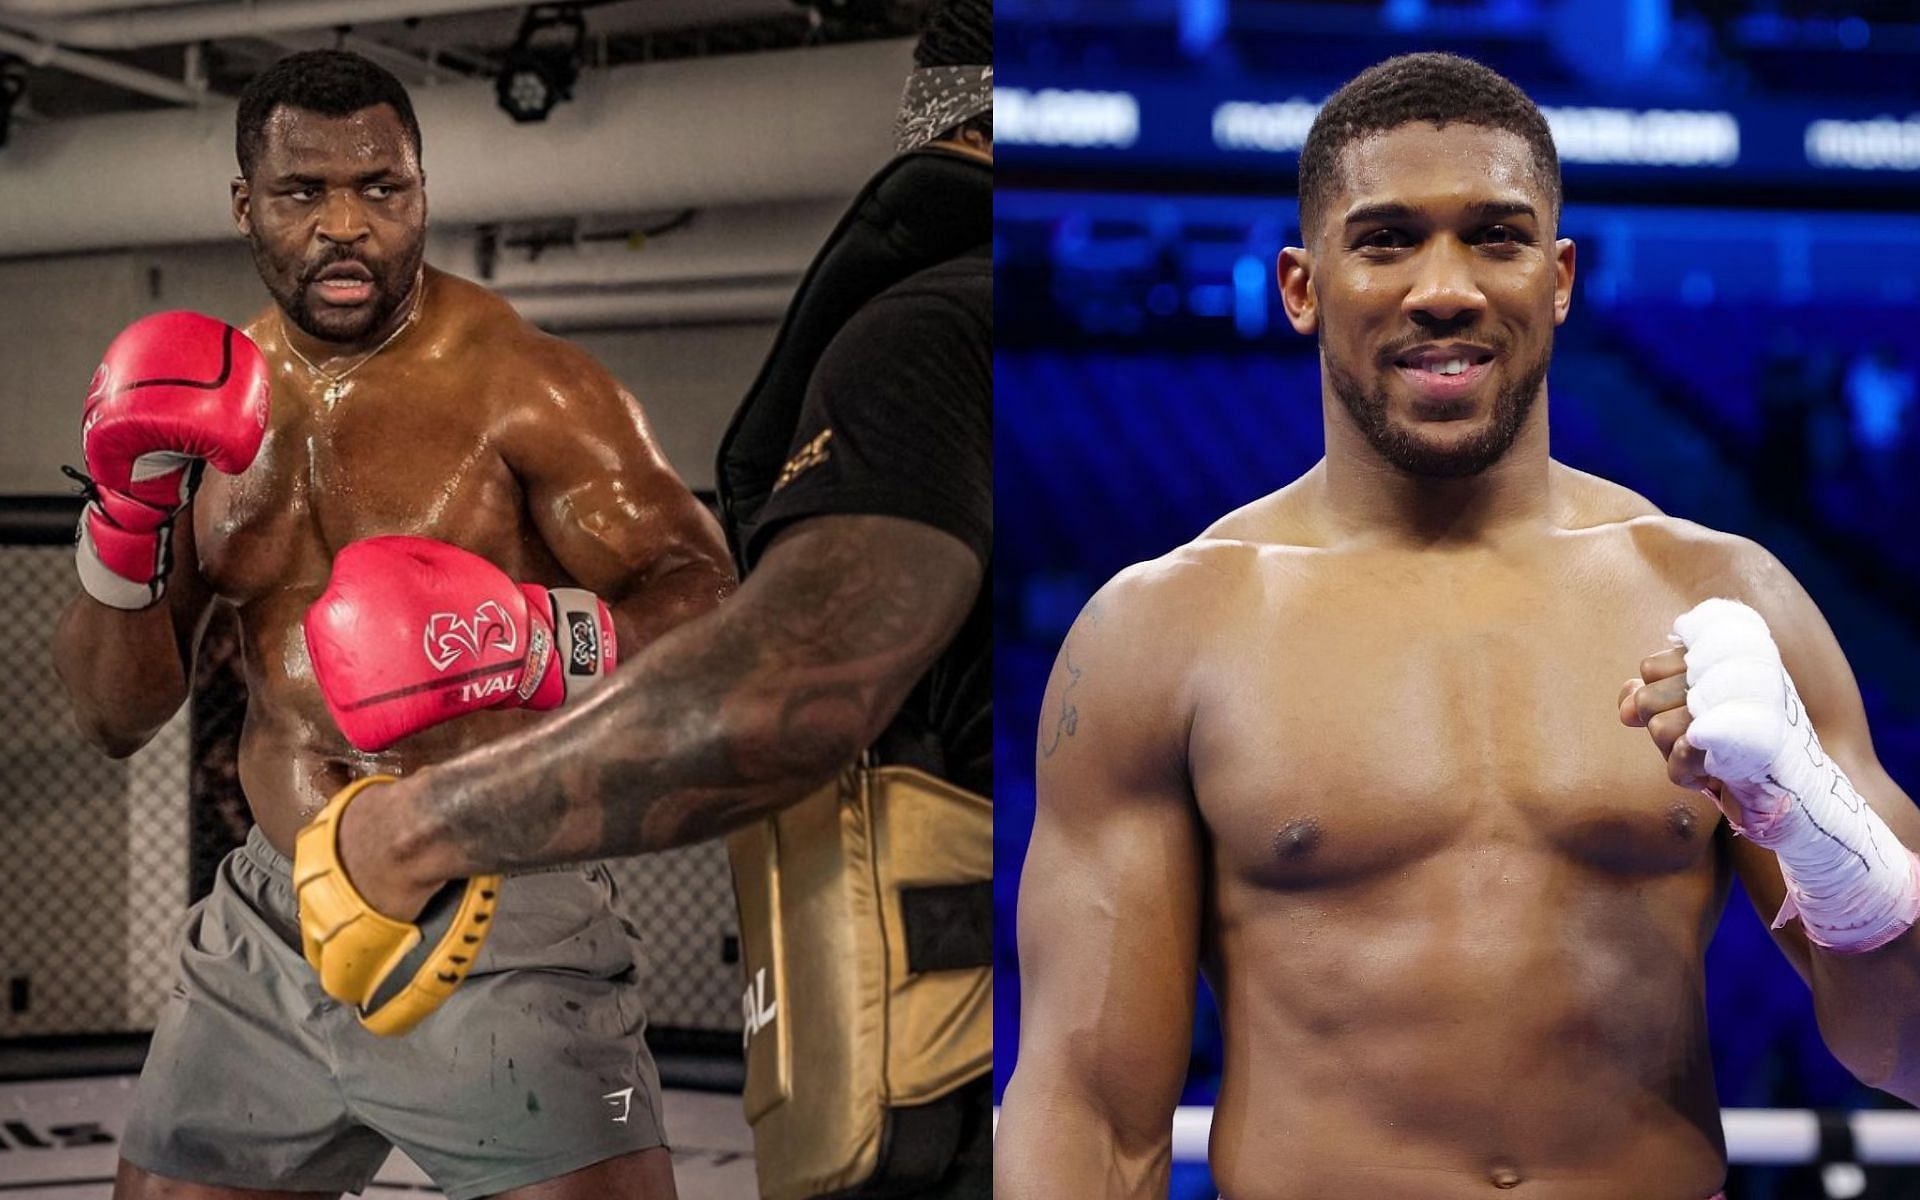 Francis Ngannou (left) and Anthony Joshua (right) [Images Courtesy: @francisngannou on Instagram and @GettyImages]